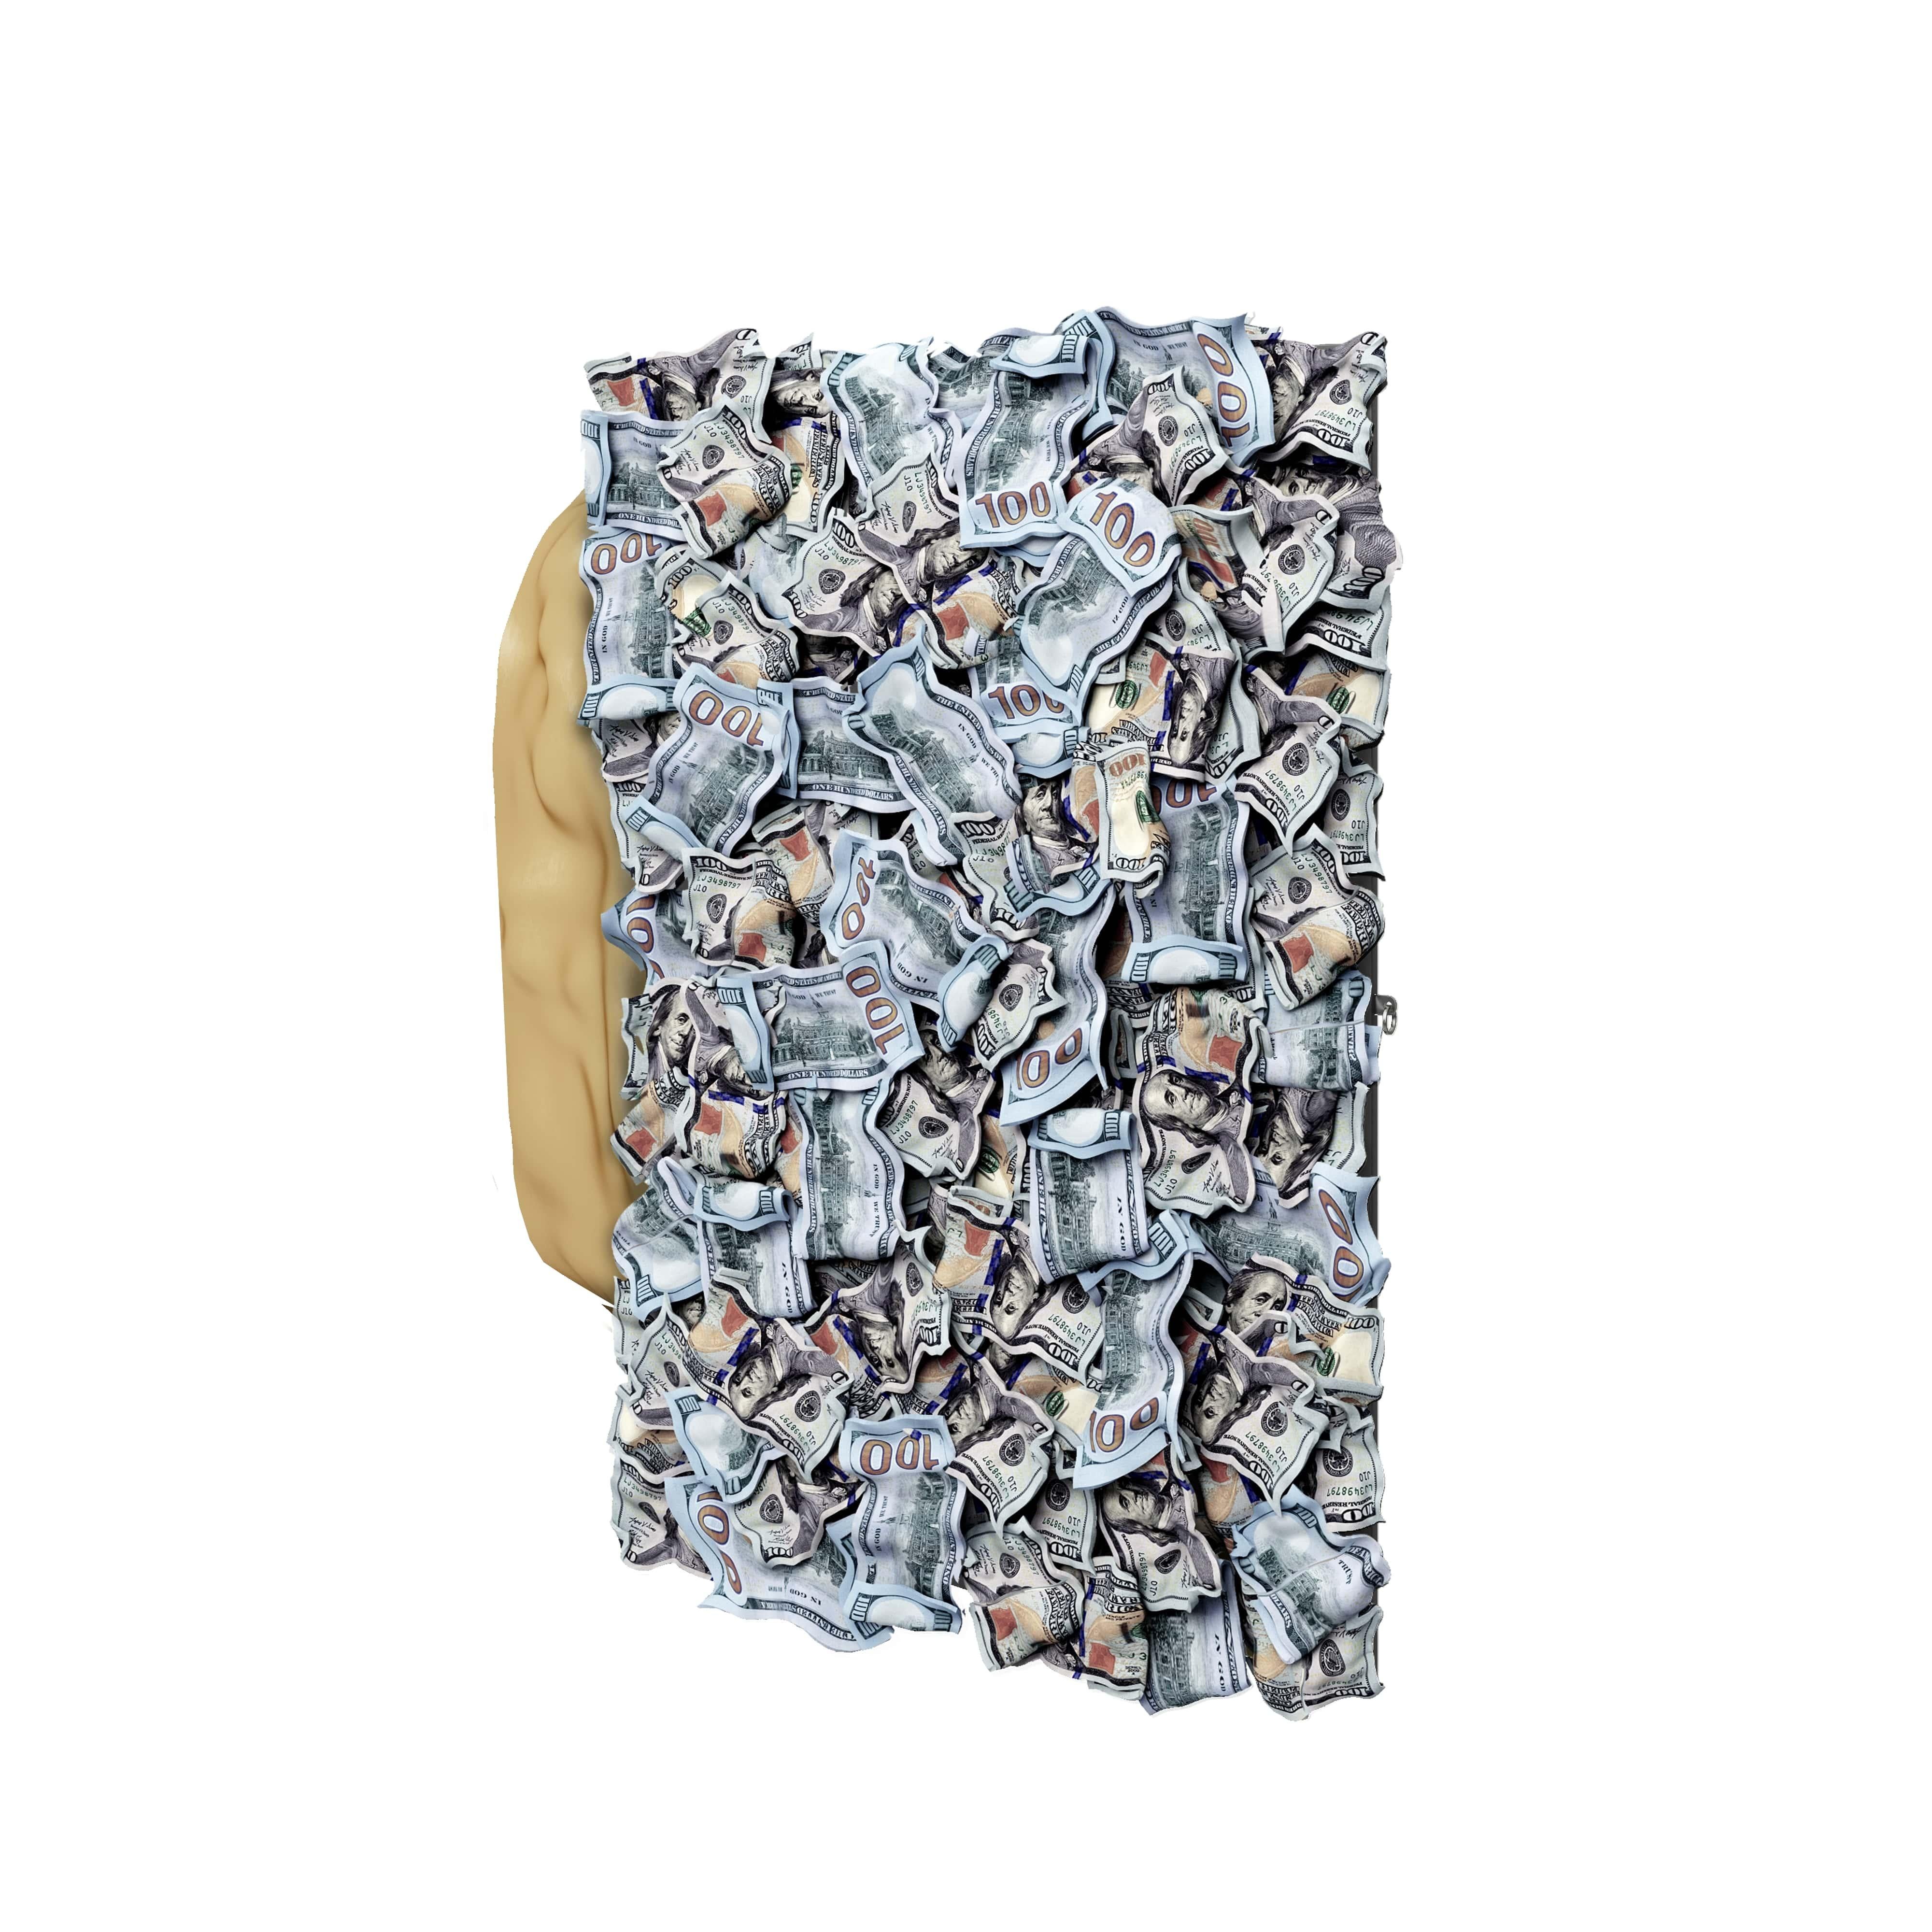 Money cabinet boasts exceptional Paul Rousso’s sculptural money banknotes, which were meticulously placed into the doors of the cabinet, to enhance its curves and perfect proportions. Made of resin and hand sculpted acrylic, the delicate details are